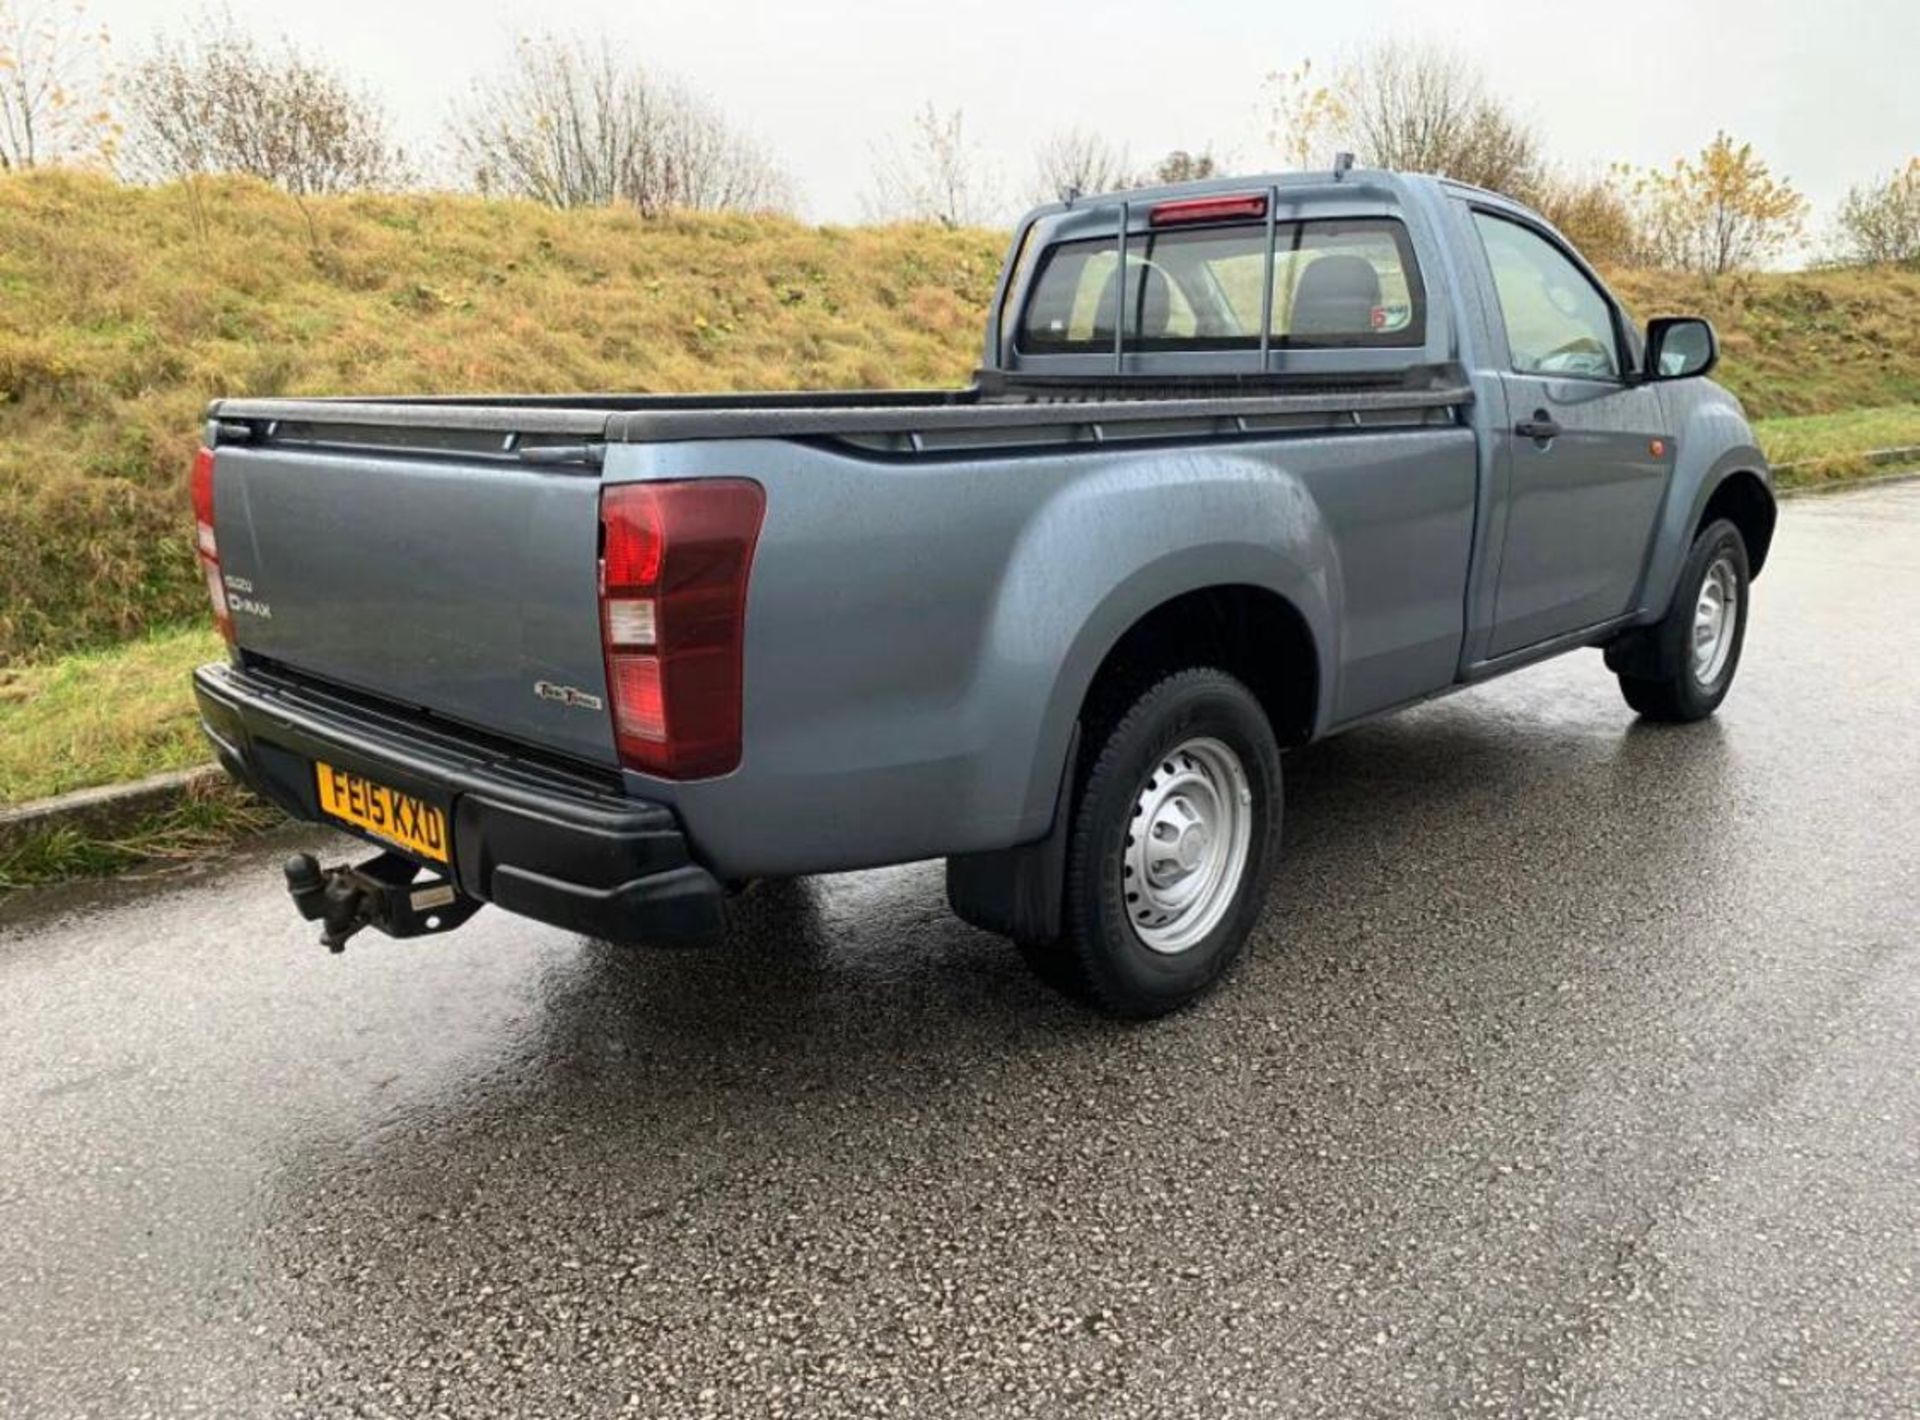 2015/15 REG ISUZU D-MAX S/C TWIN TURBO 4X4 TD 2.5 DIESEL PICK-UP, SHOWING 0 FORMER KEEPERS *NO VAT* - Image 5 of 10